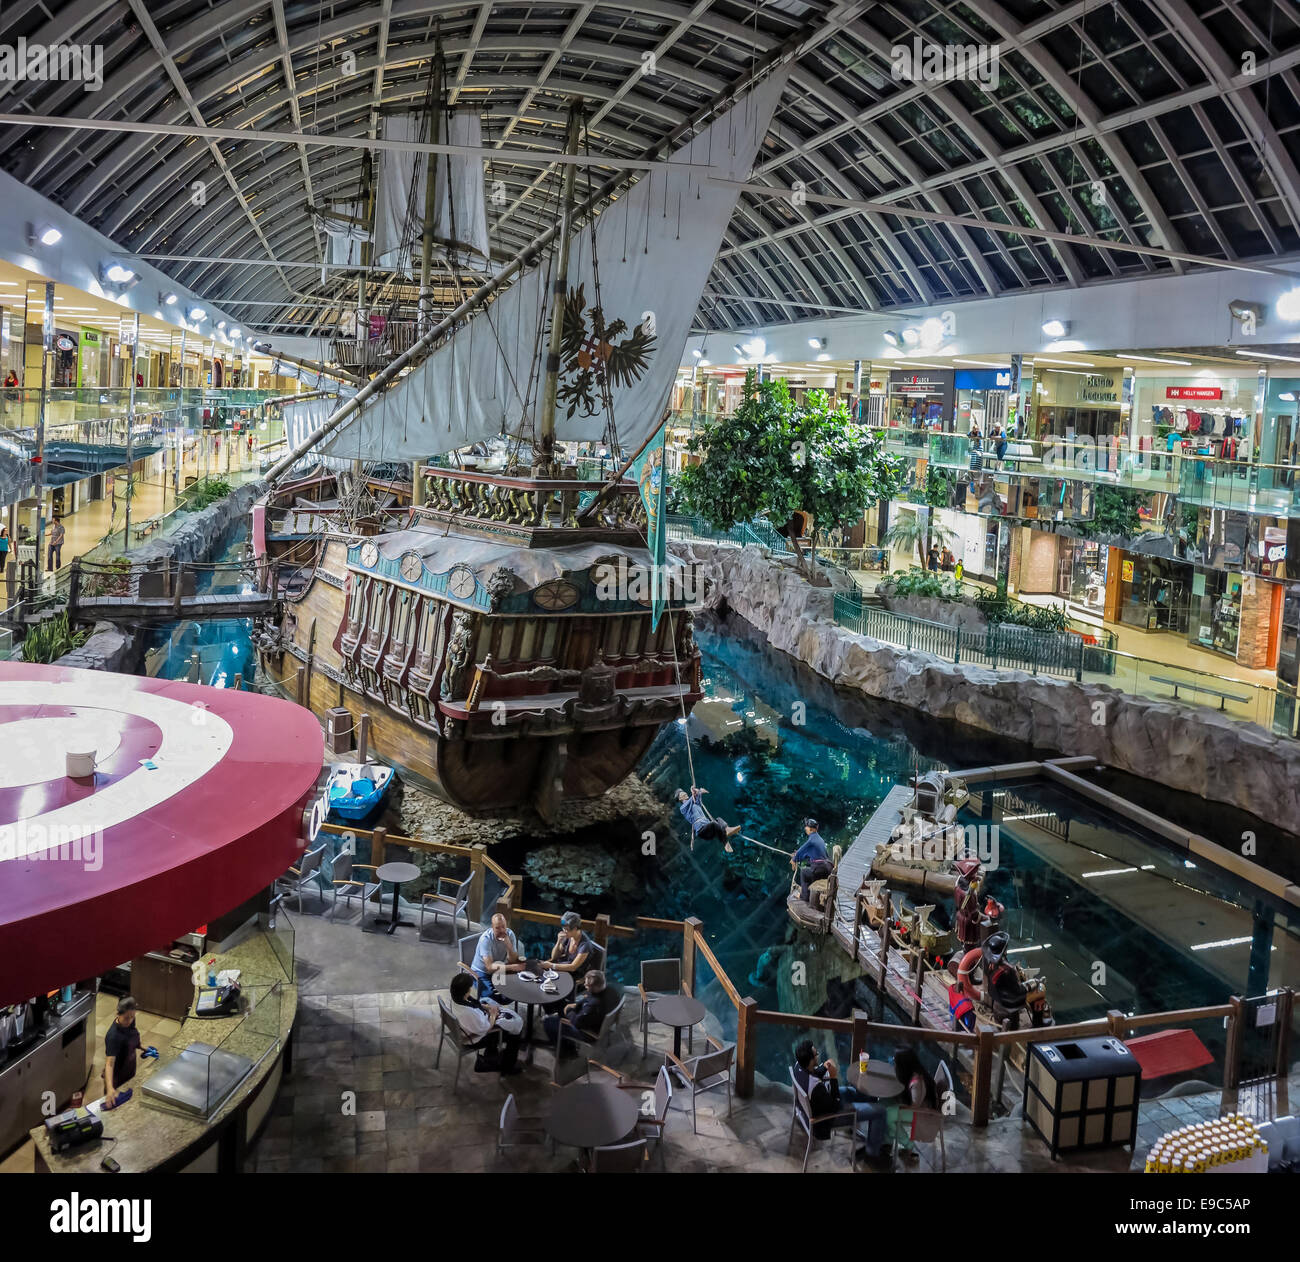 Unidentified People At West Edmonton Mall In Alberta Canada Stock Photo Alamy